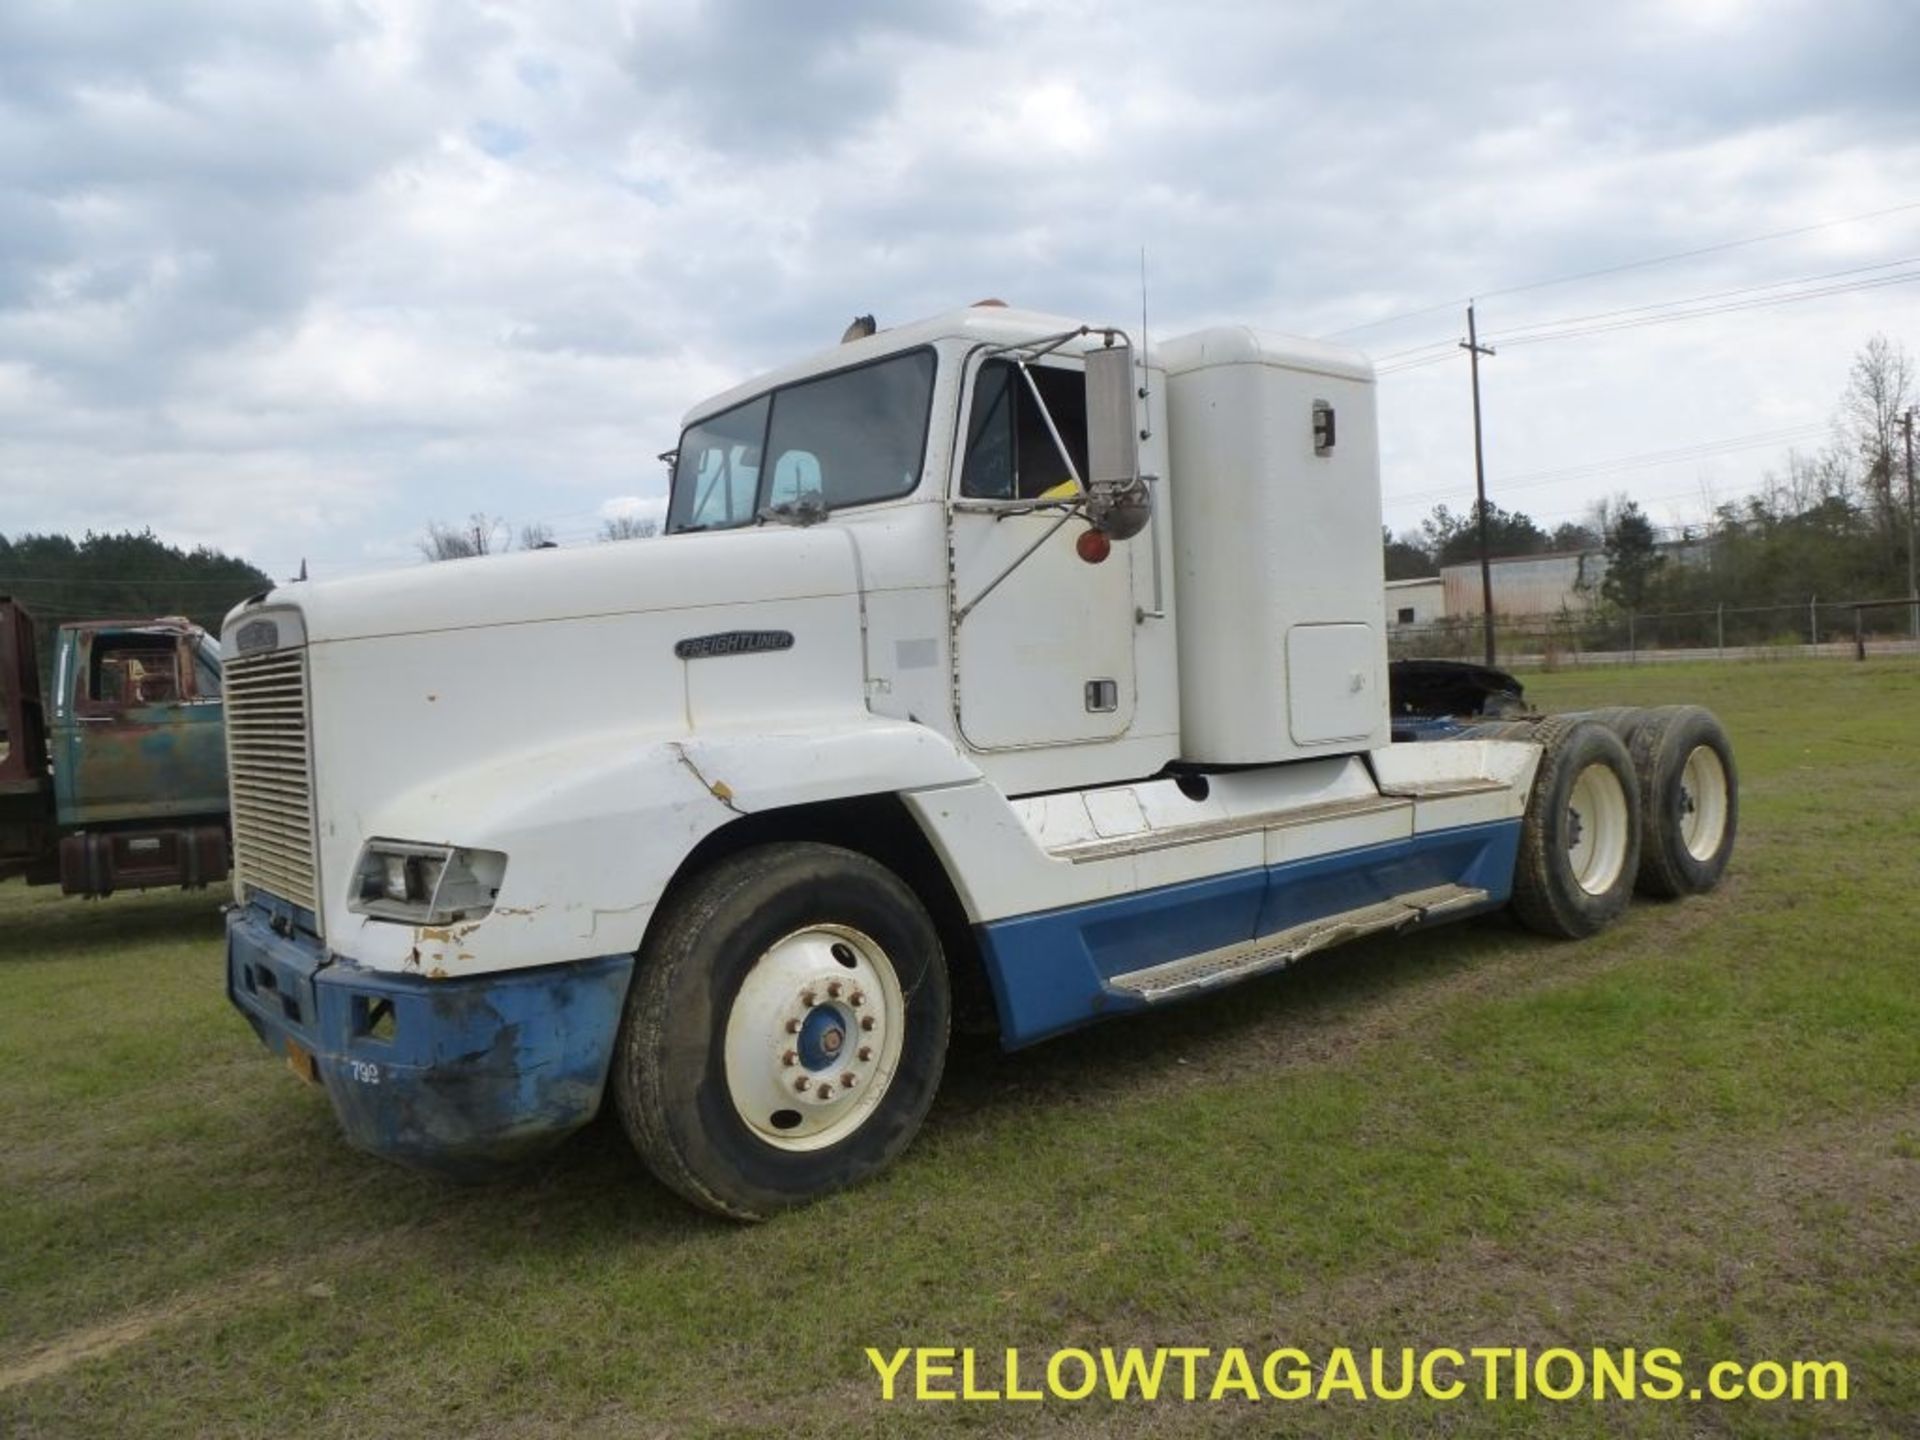 1989 Freightliner FLD 120 Truck Tractor|VIN #1FUYDCYBXKP338622;|Titled, Non-Taxable||Tag: 849